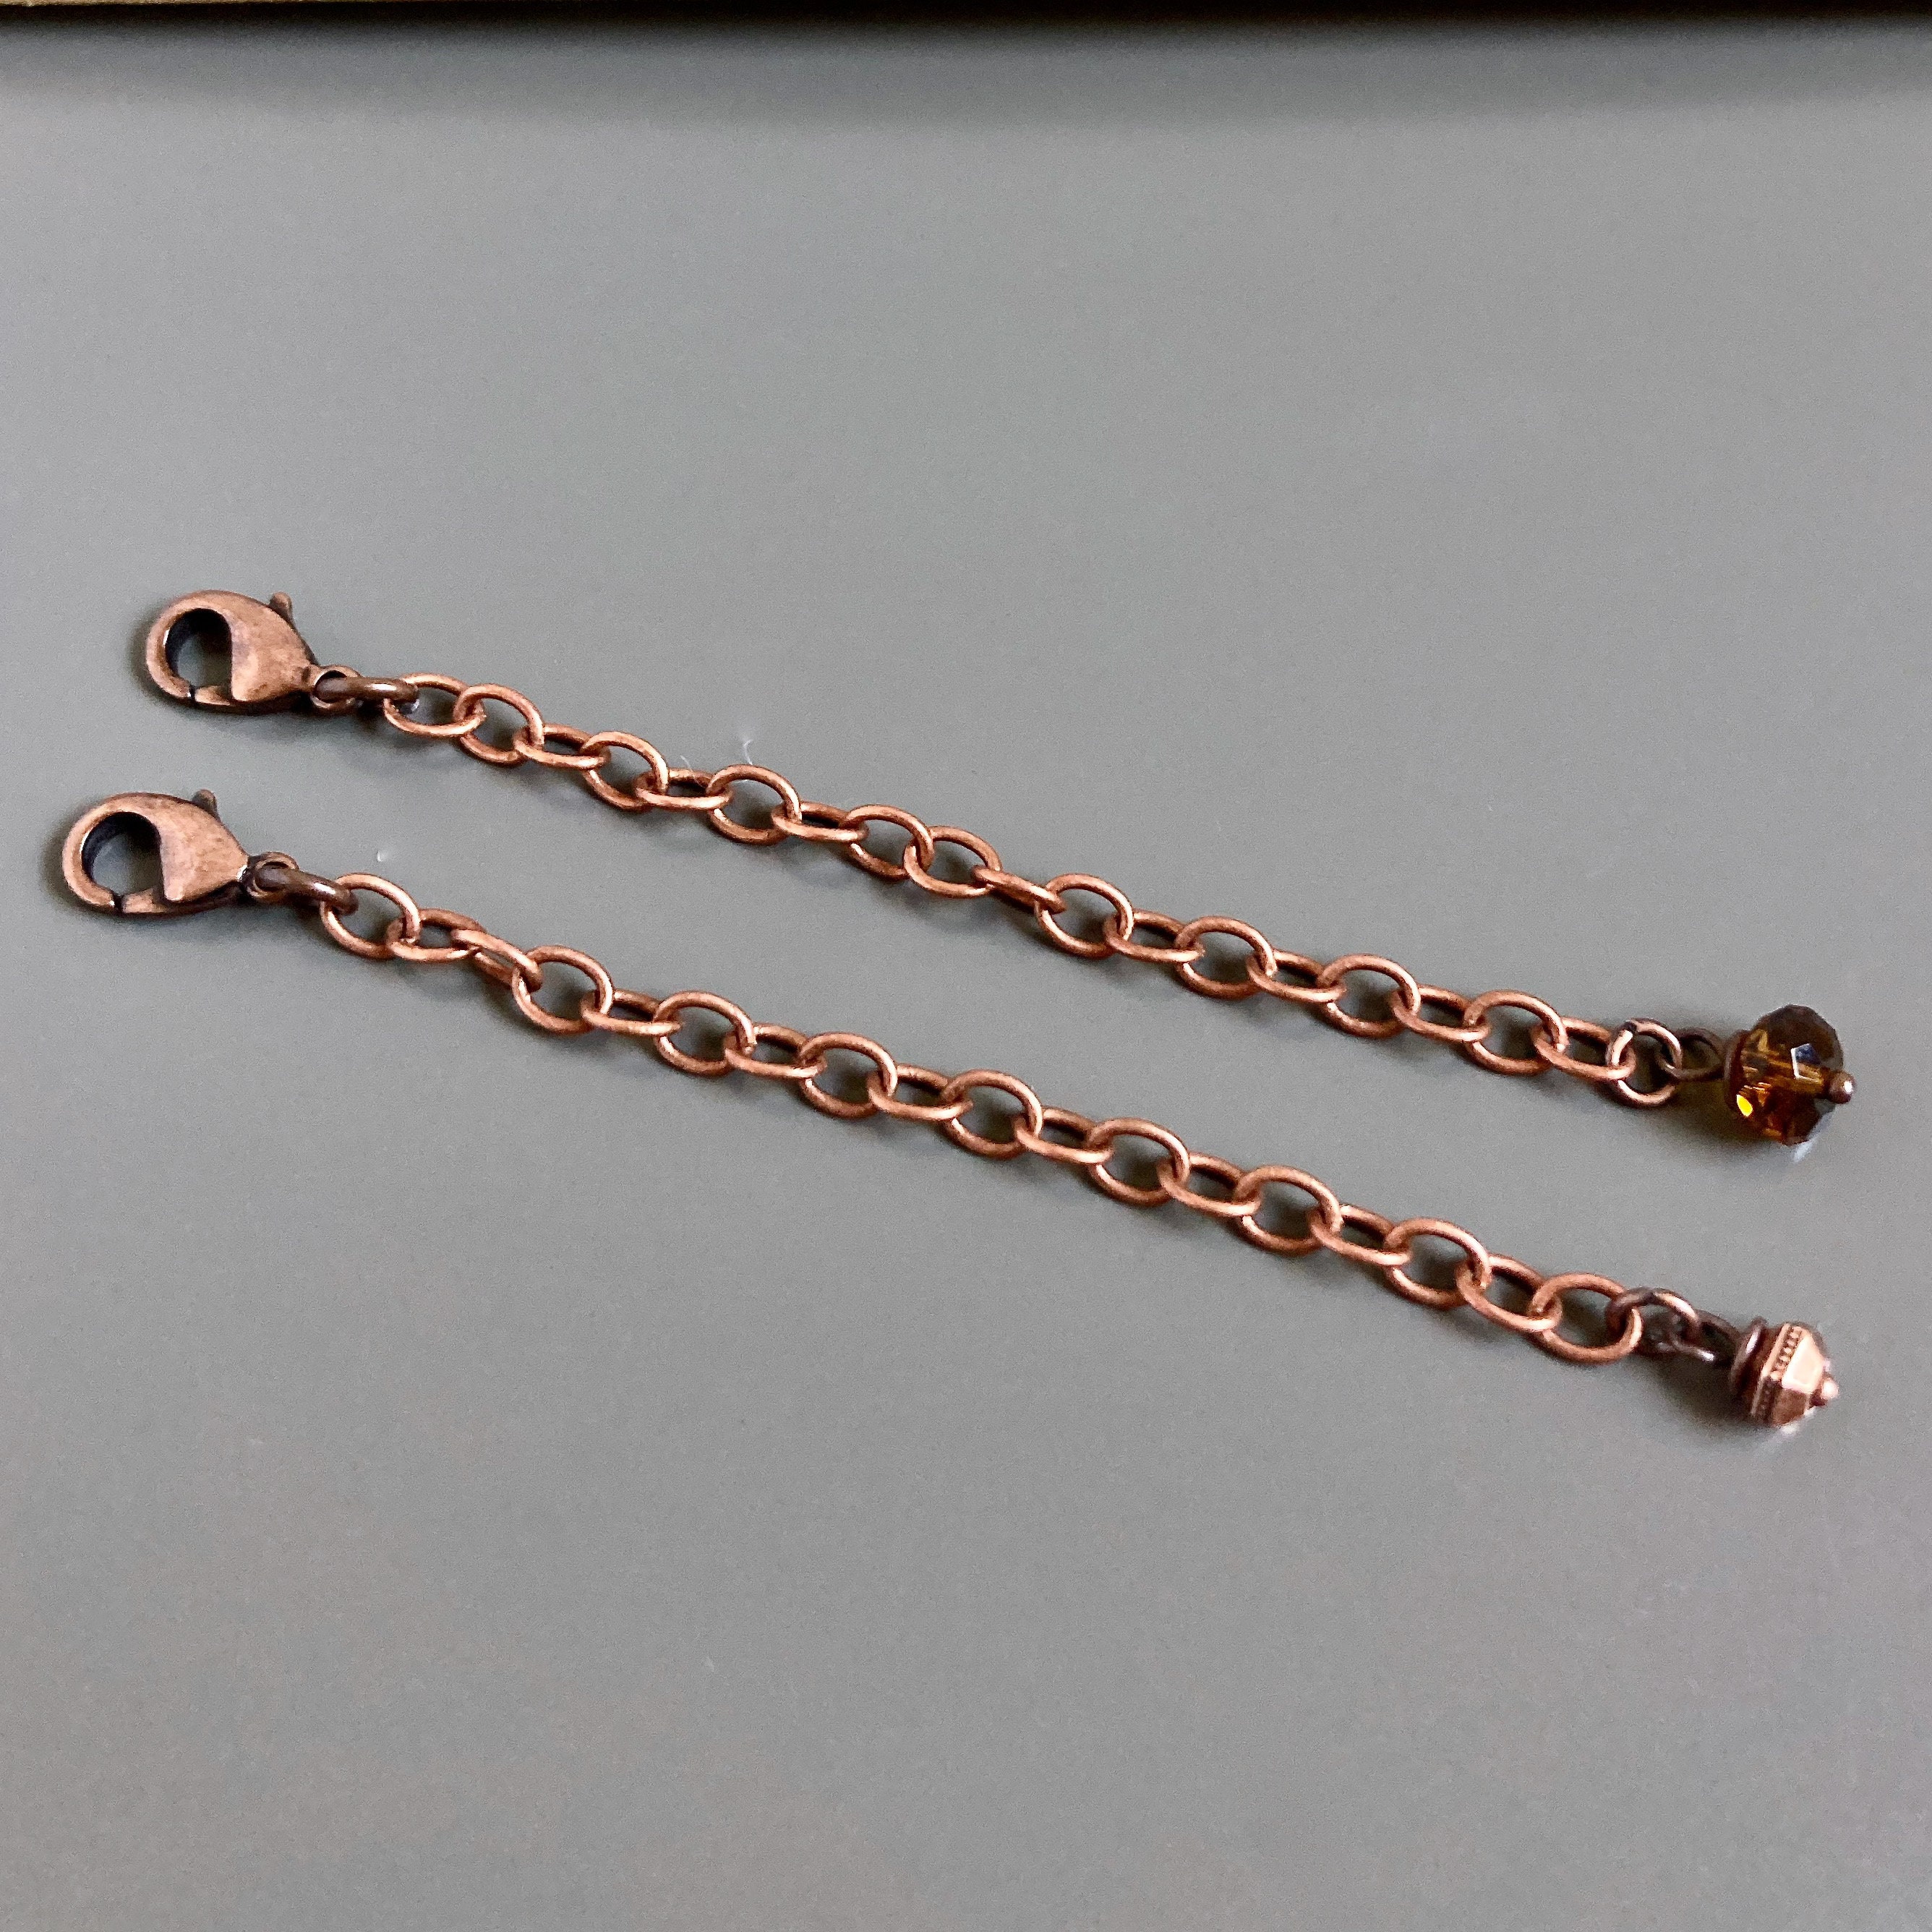 Solid Copper Chain Necklace CN728G - 5/16 of an inch wide - 18 inches long.